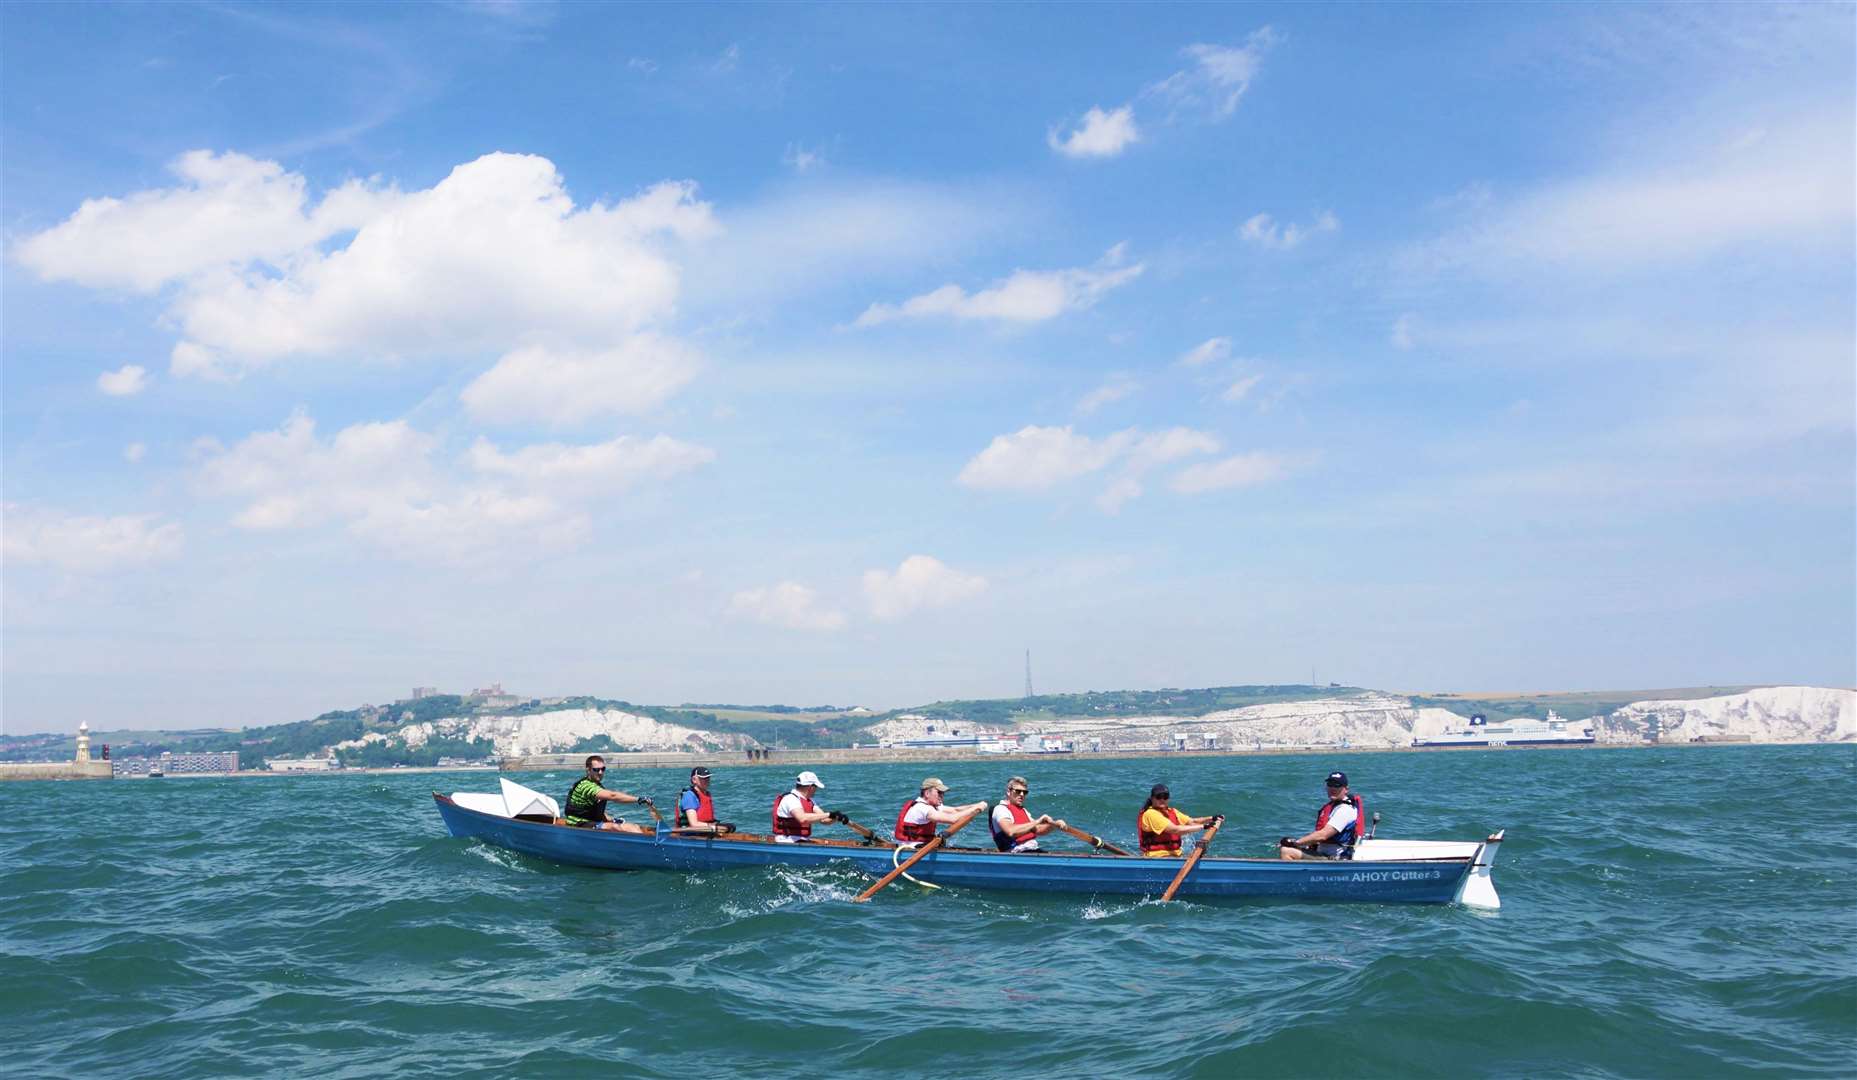 A scene from last June's Channel Row Challenge. Picture: The AHOY Centre